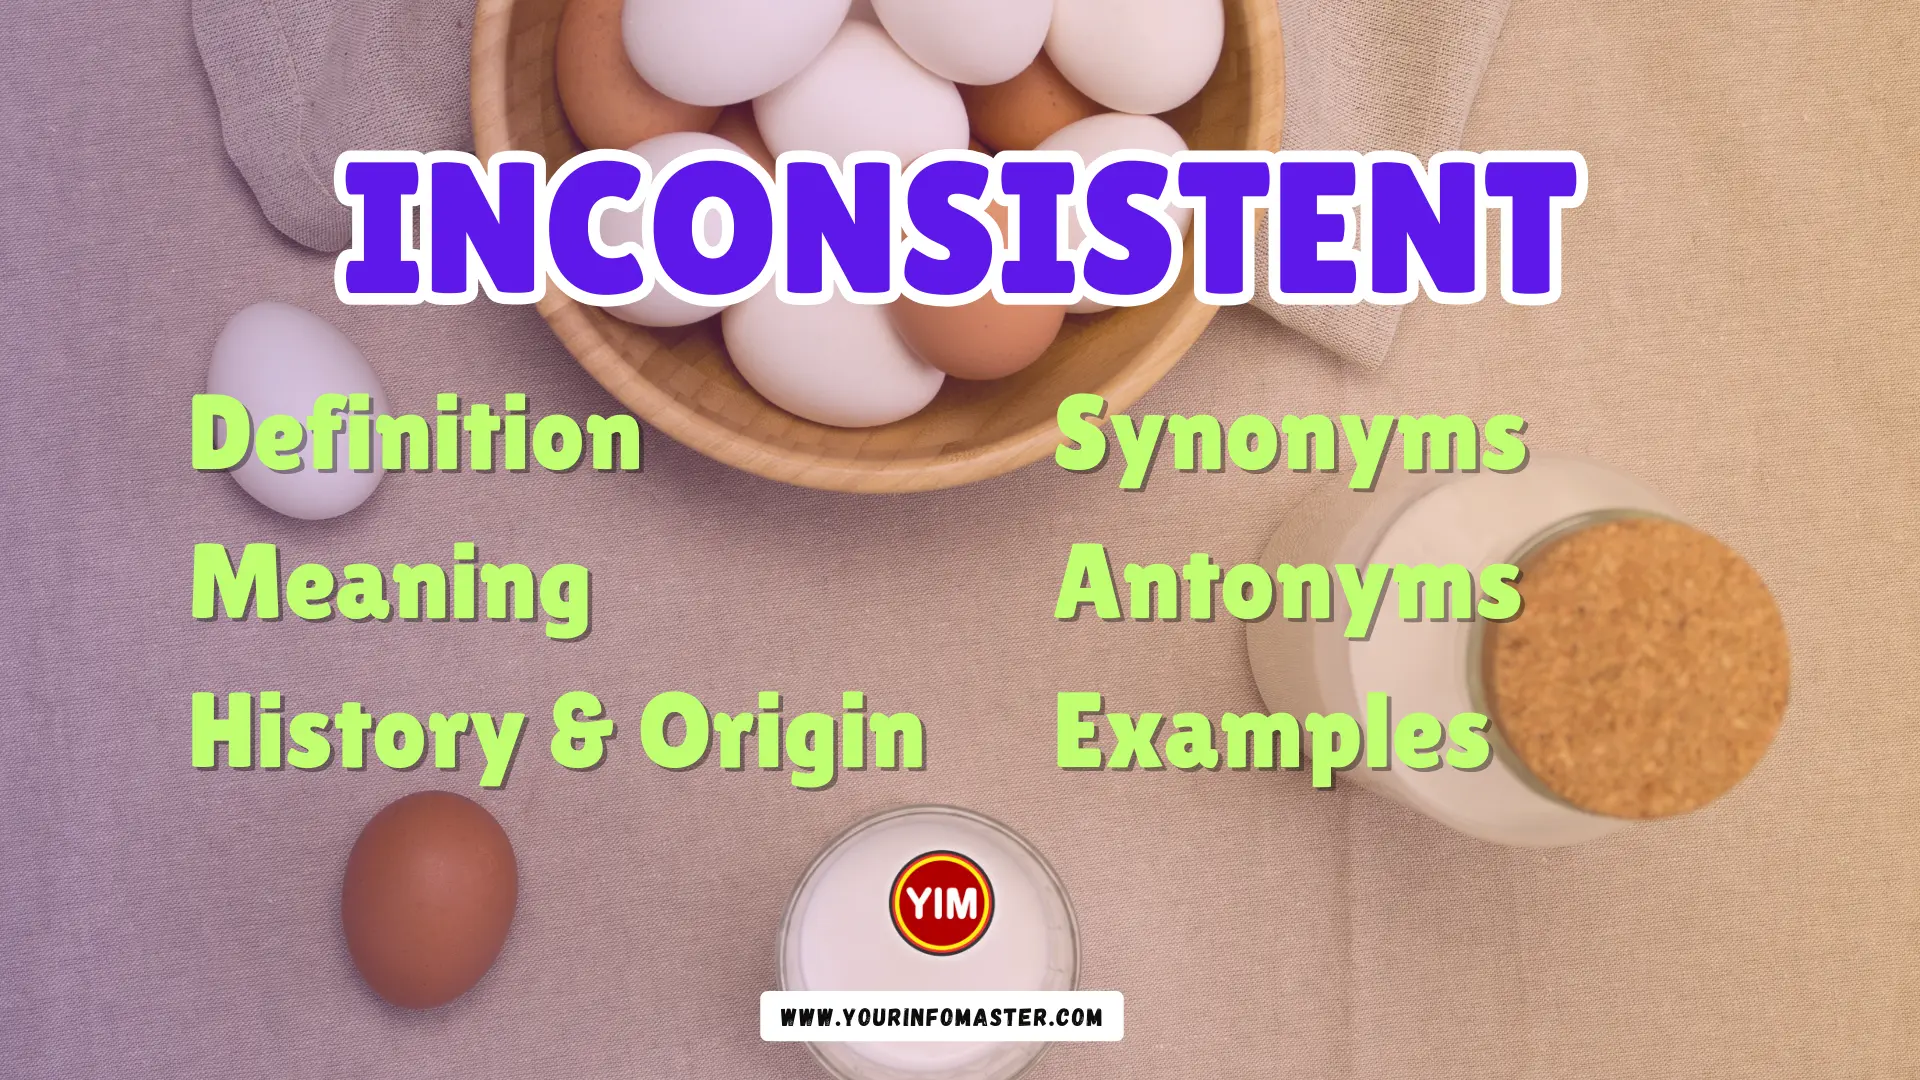 Inconsistent Synonyms, Antonyms, Example Sentences